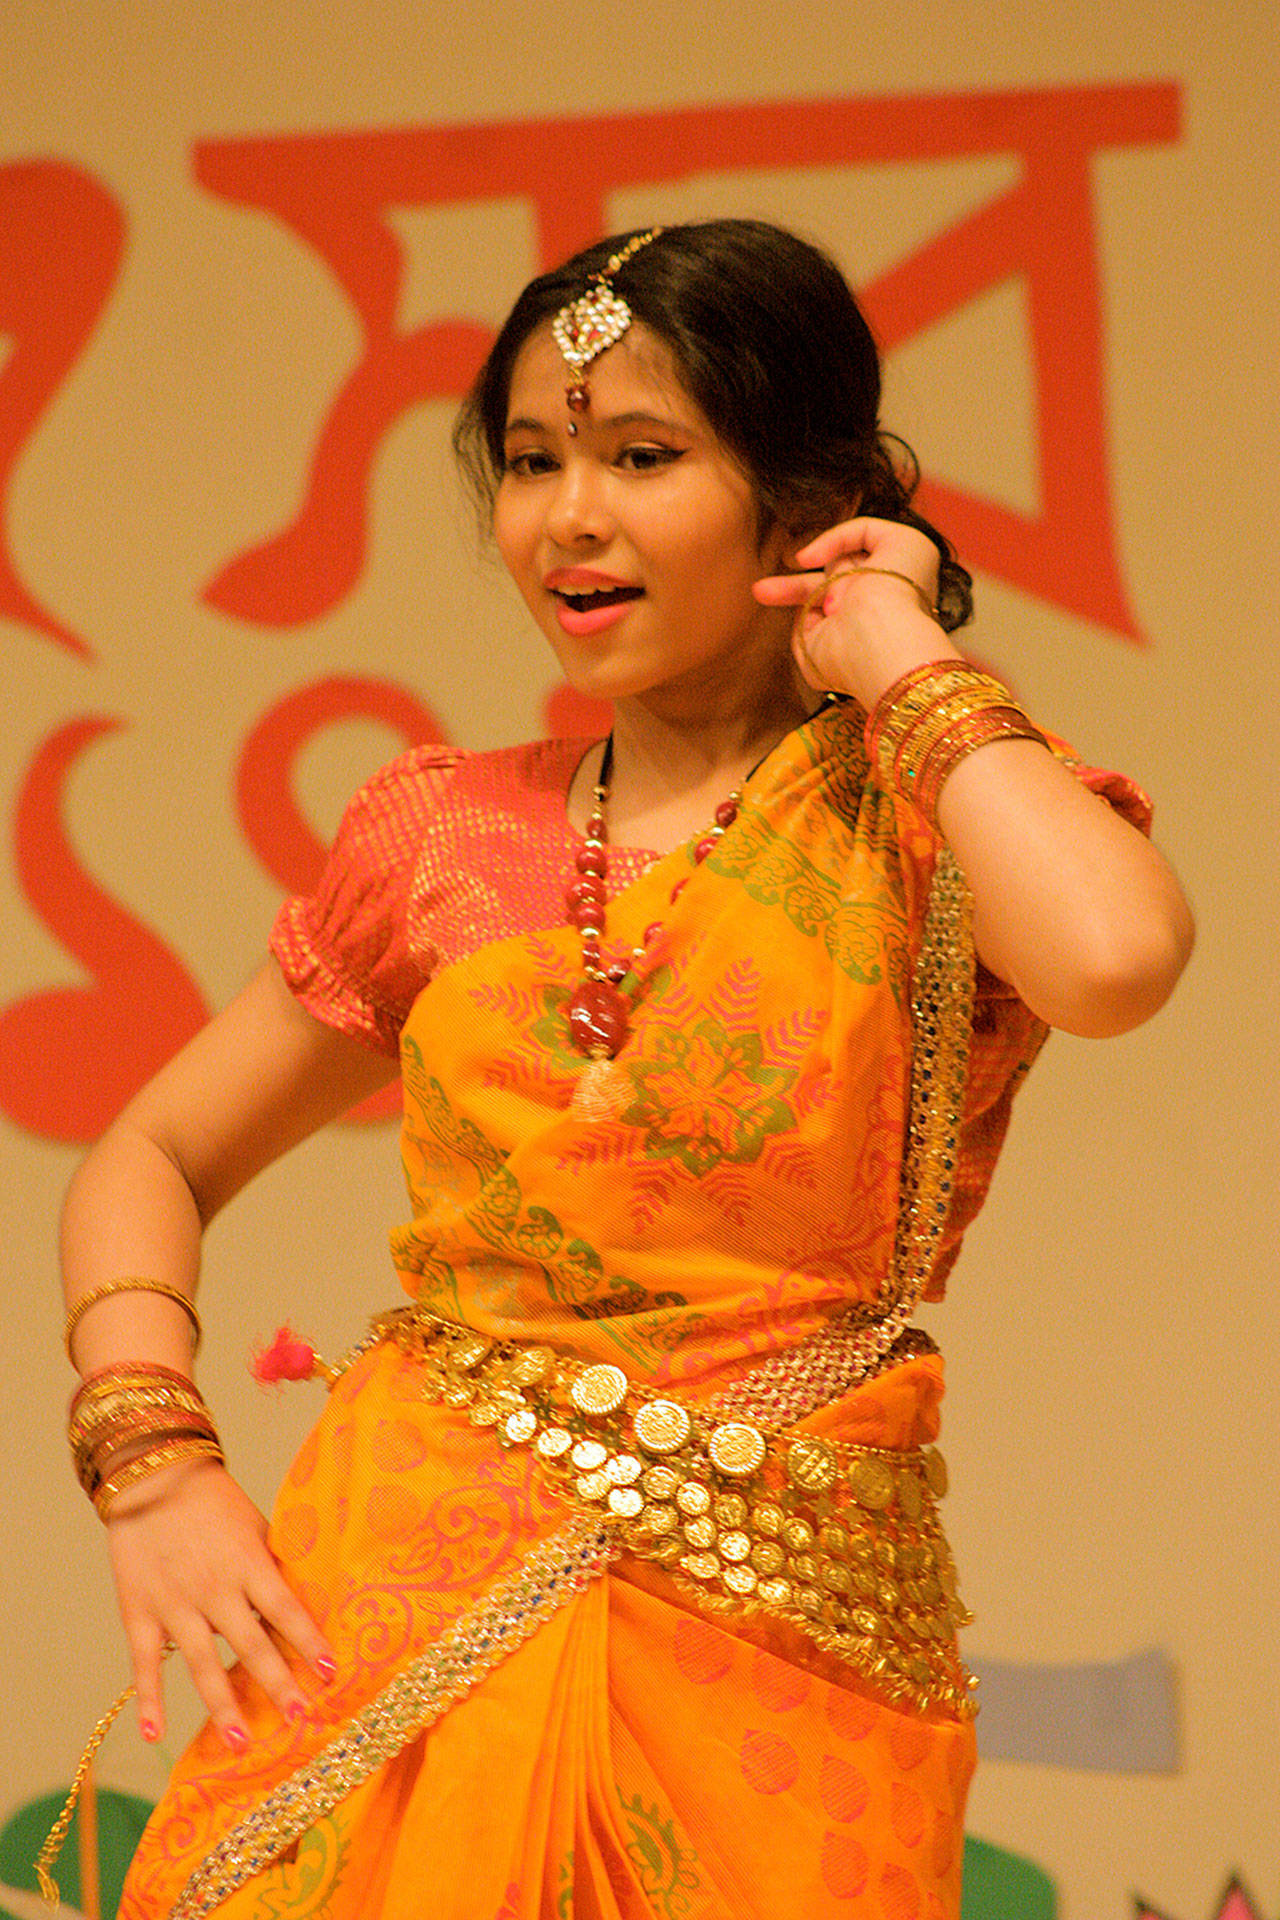 Rijah Taher, 11, performs a dance during a Bengali New Year celebration last Saturday at the Kent Senior Activity Center.